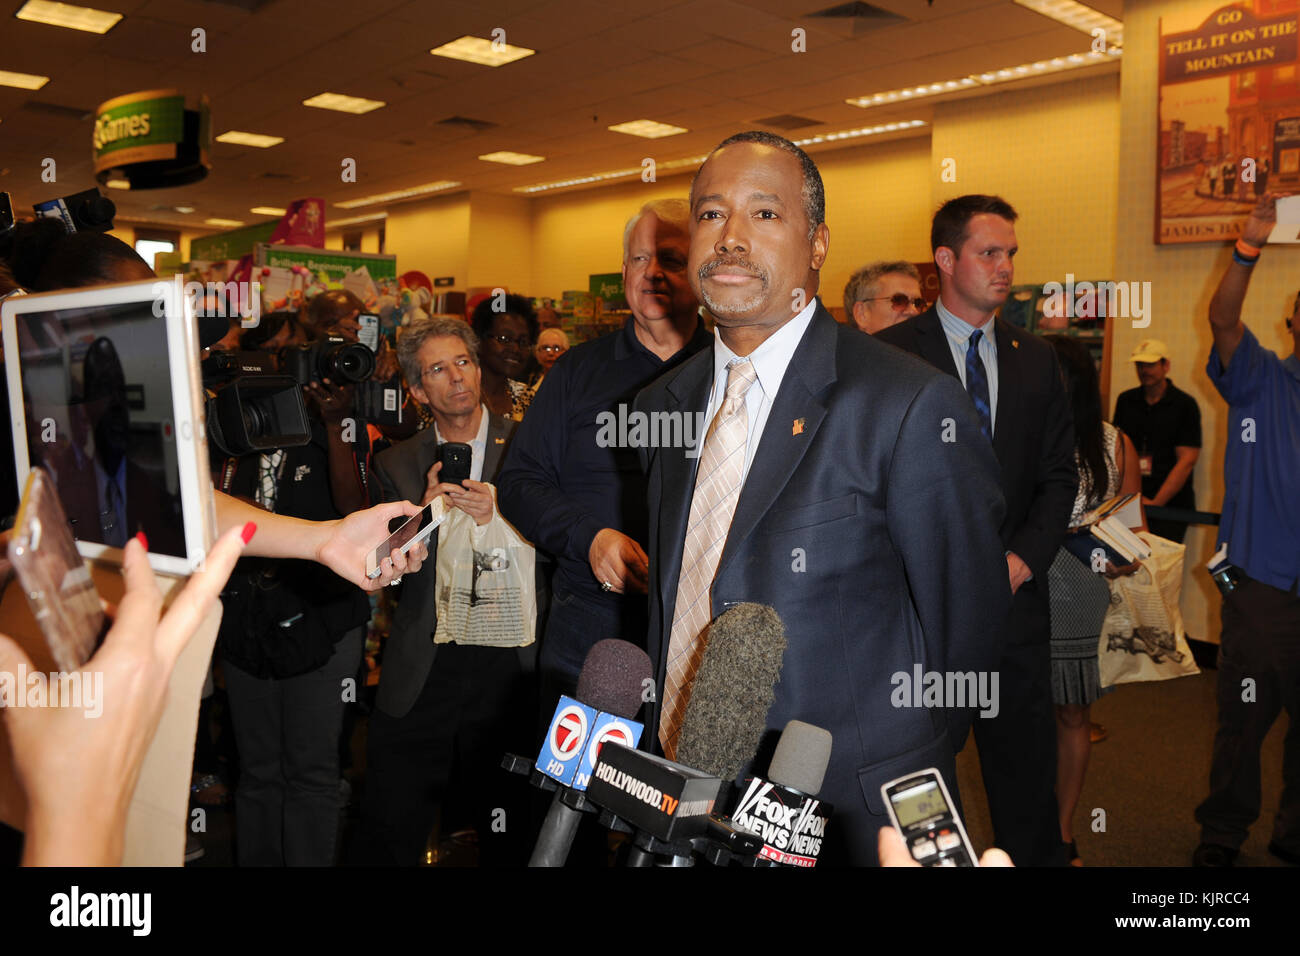 FORT LAUDERDALE FL - NOVEMBER 05: Presidential candidate Dr. Ben Carson attends a book signing at Barnes and Noble where he signed copies of his book 'A More Perfect Union' on November 5, 2015 in Fort Lauderdale, Florida  People:  Dr. Ben Carson Stock Photo